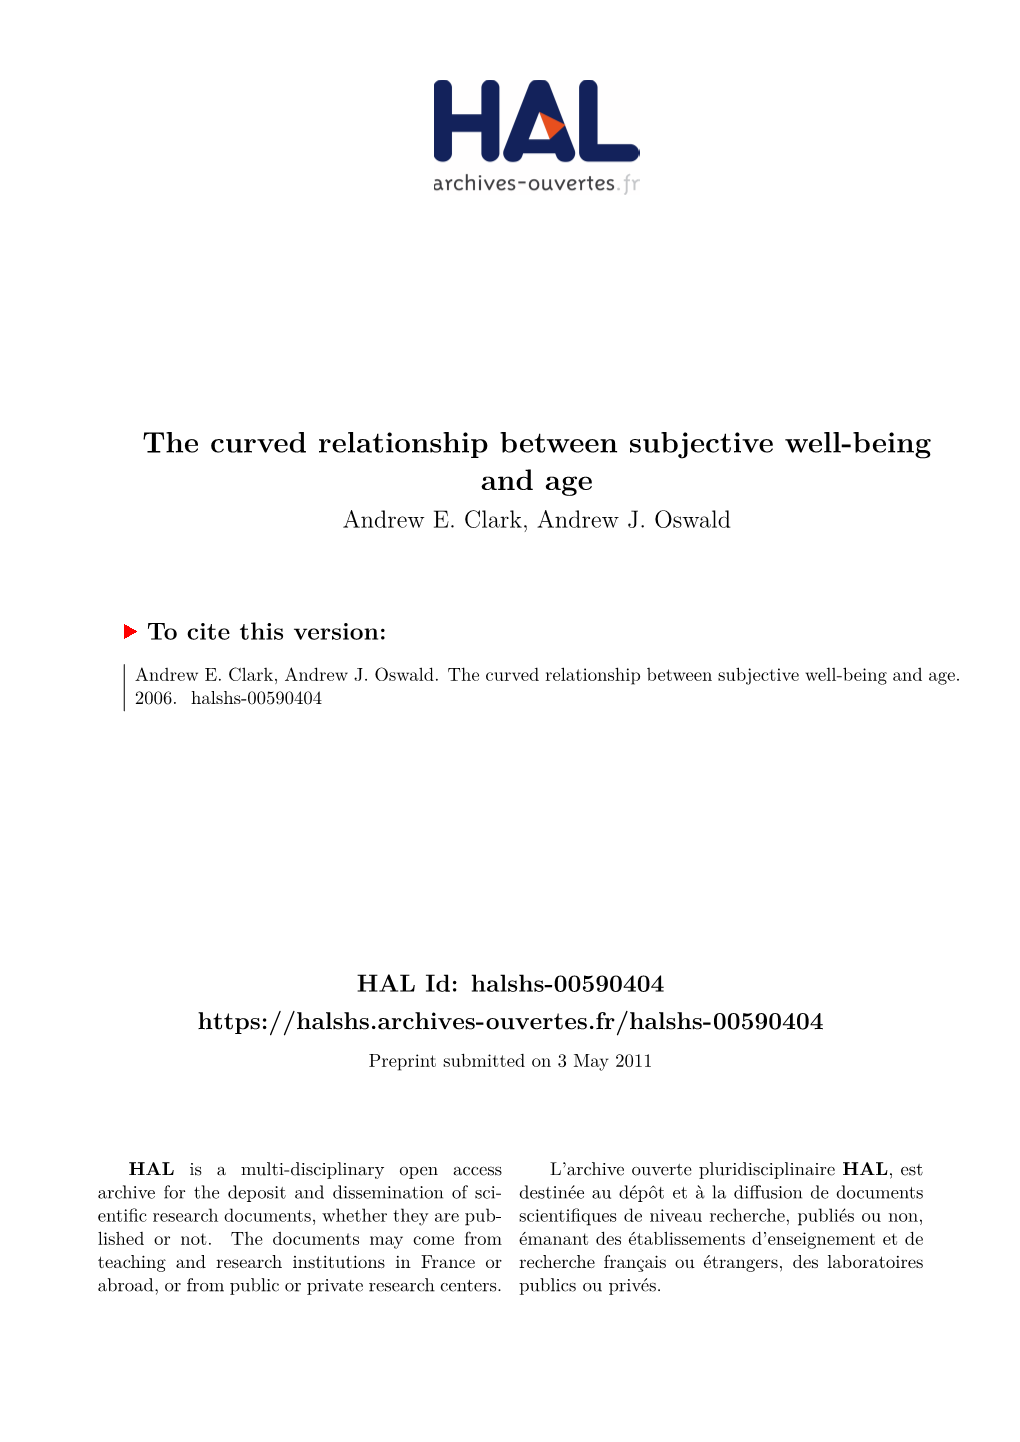 The Curved Relationship Between Subjective Well-Being and Age Andrew E